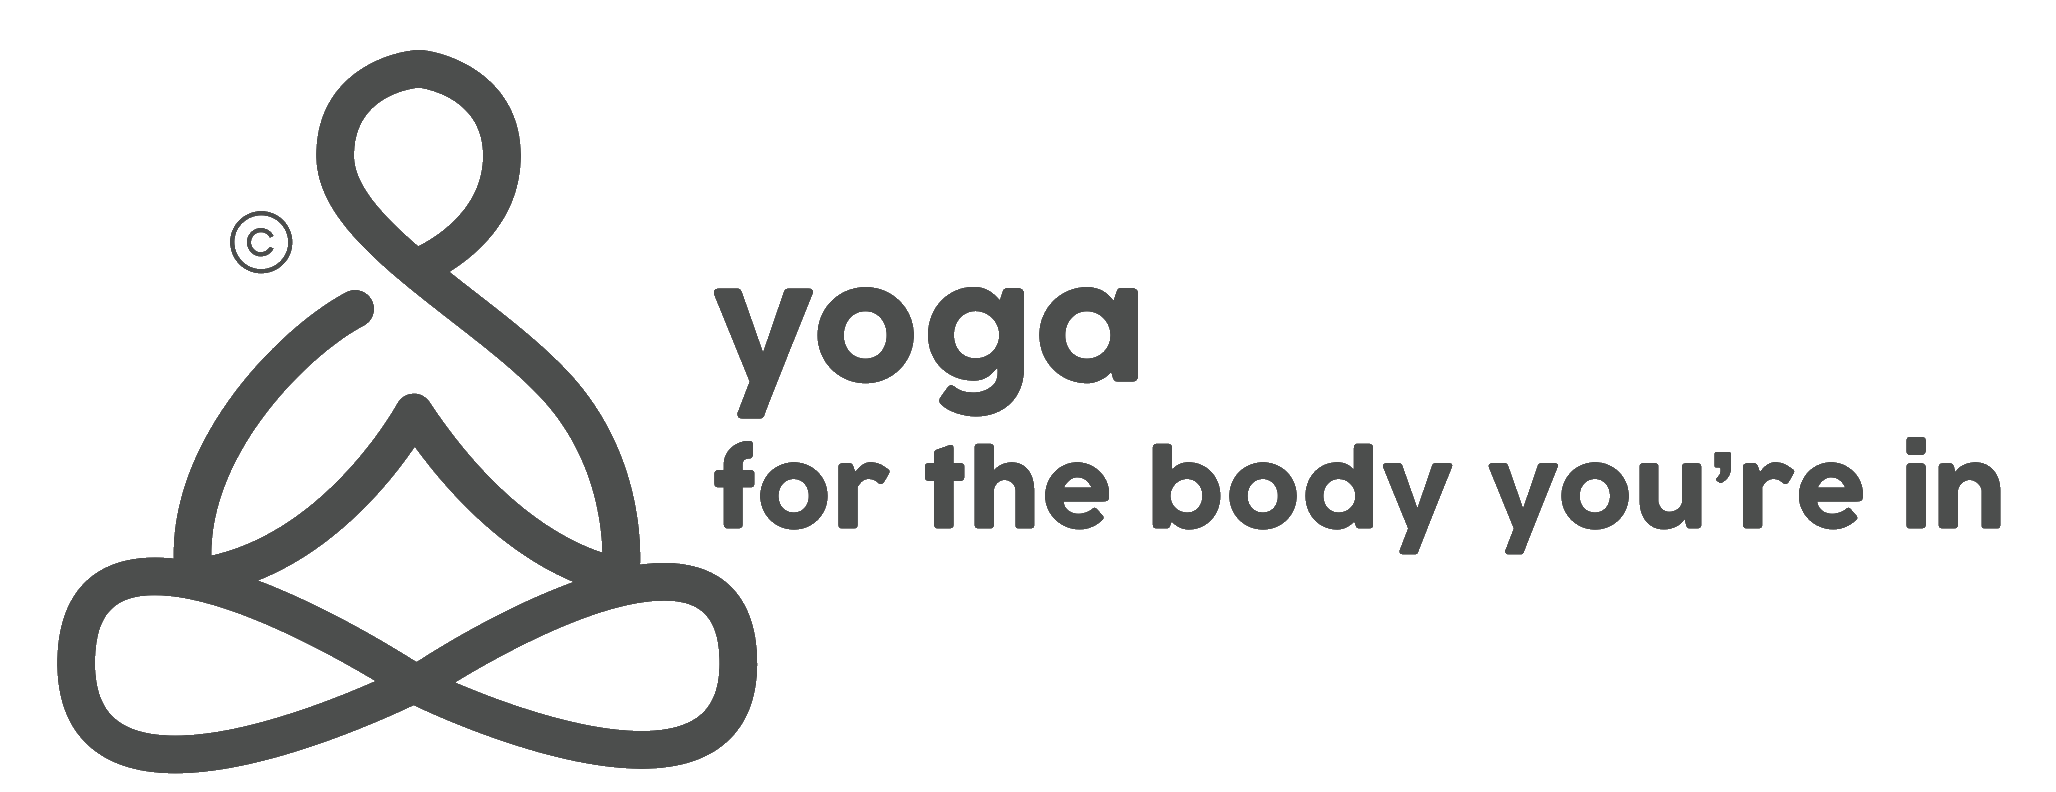 Yoga For the Body You’re In  – Blog